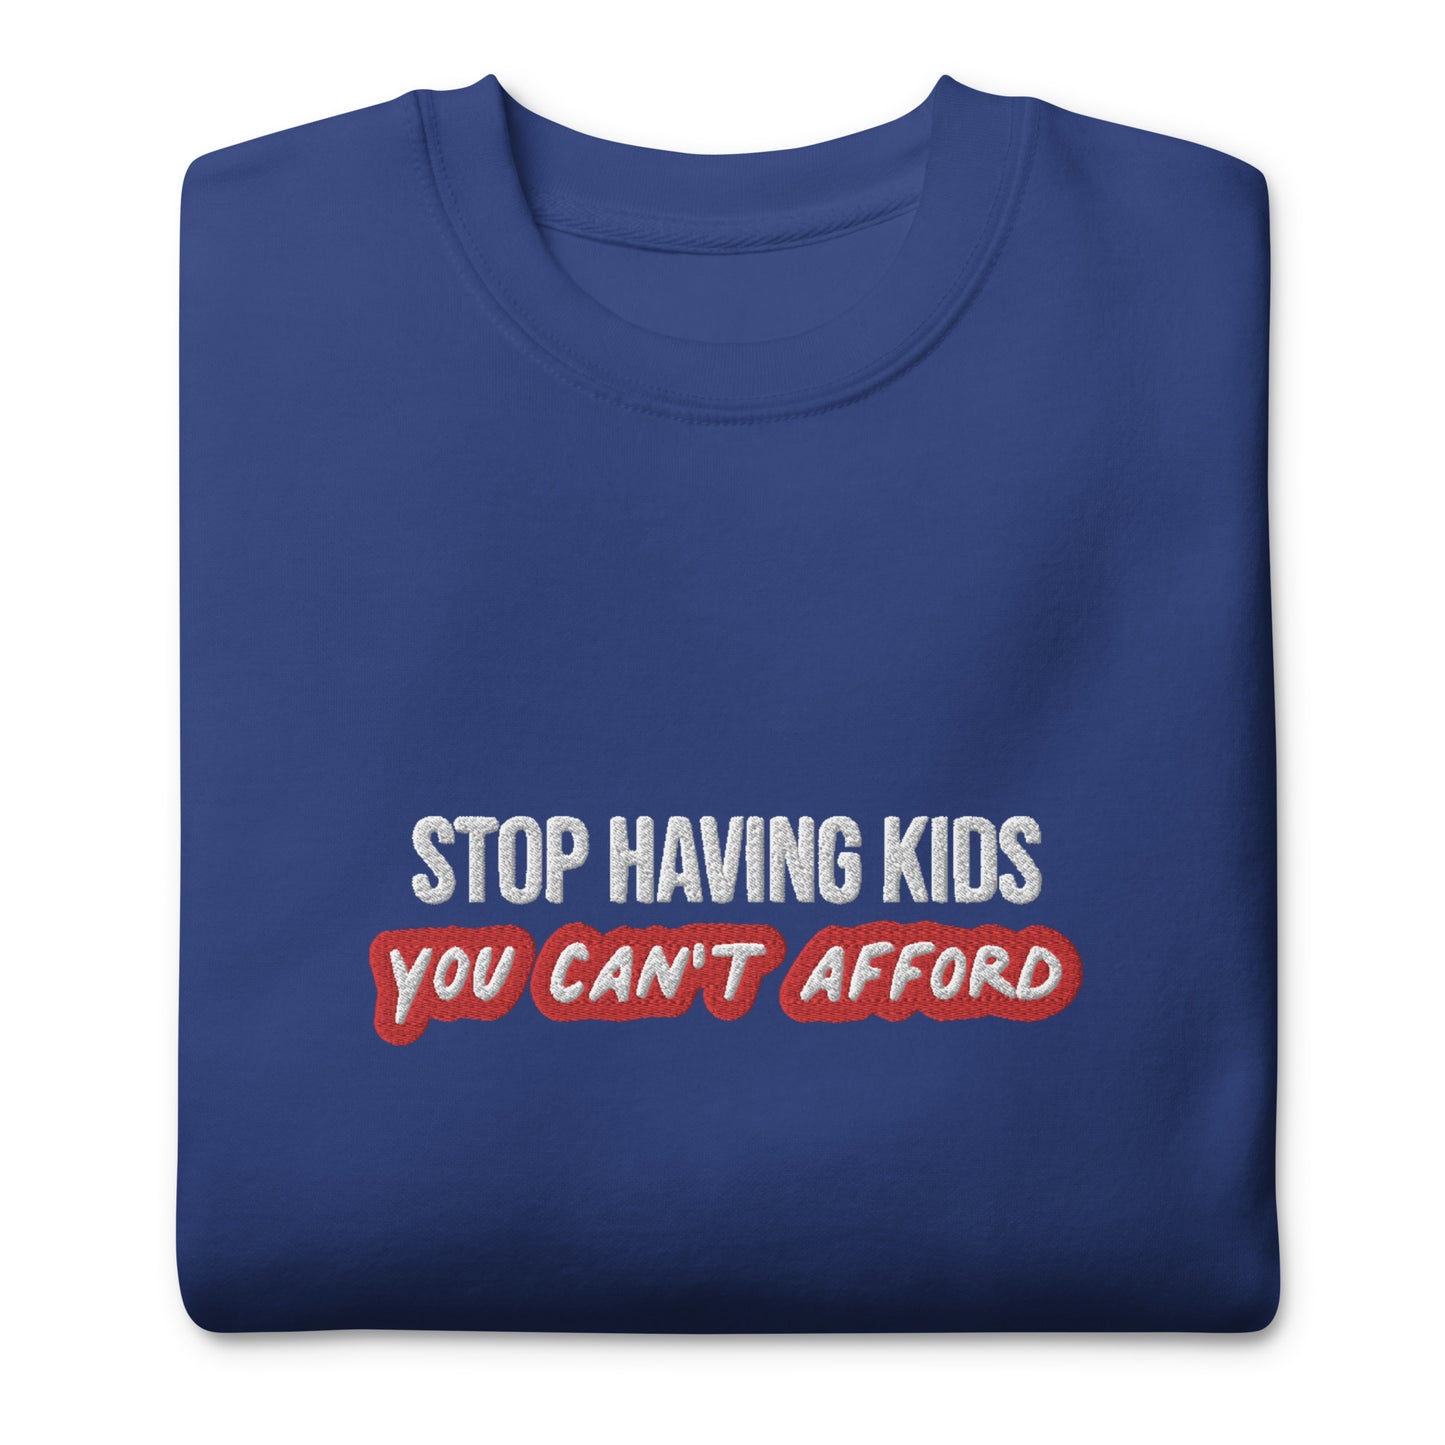 Stop Having Kids You Can't Afford Embroidered Unisex Sweatshirt